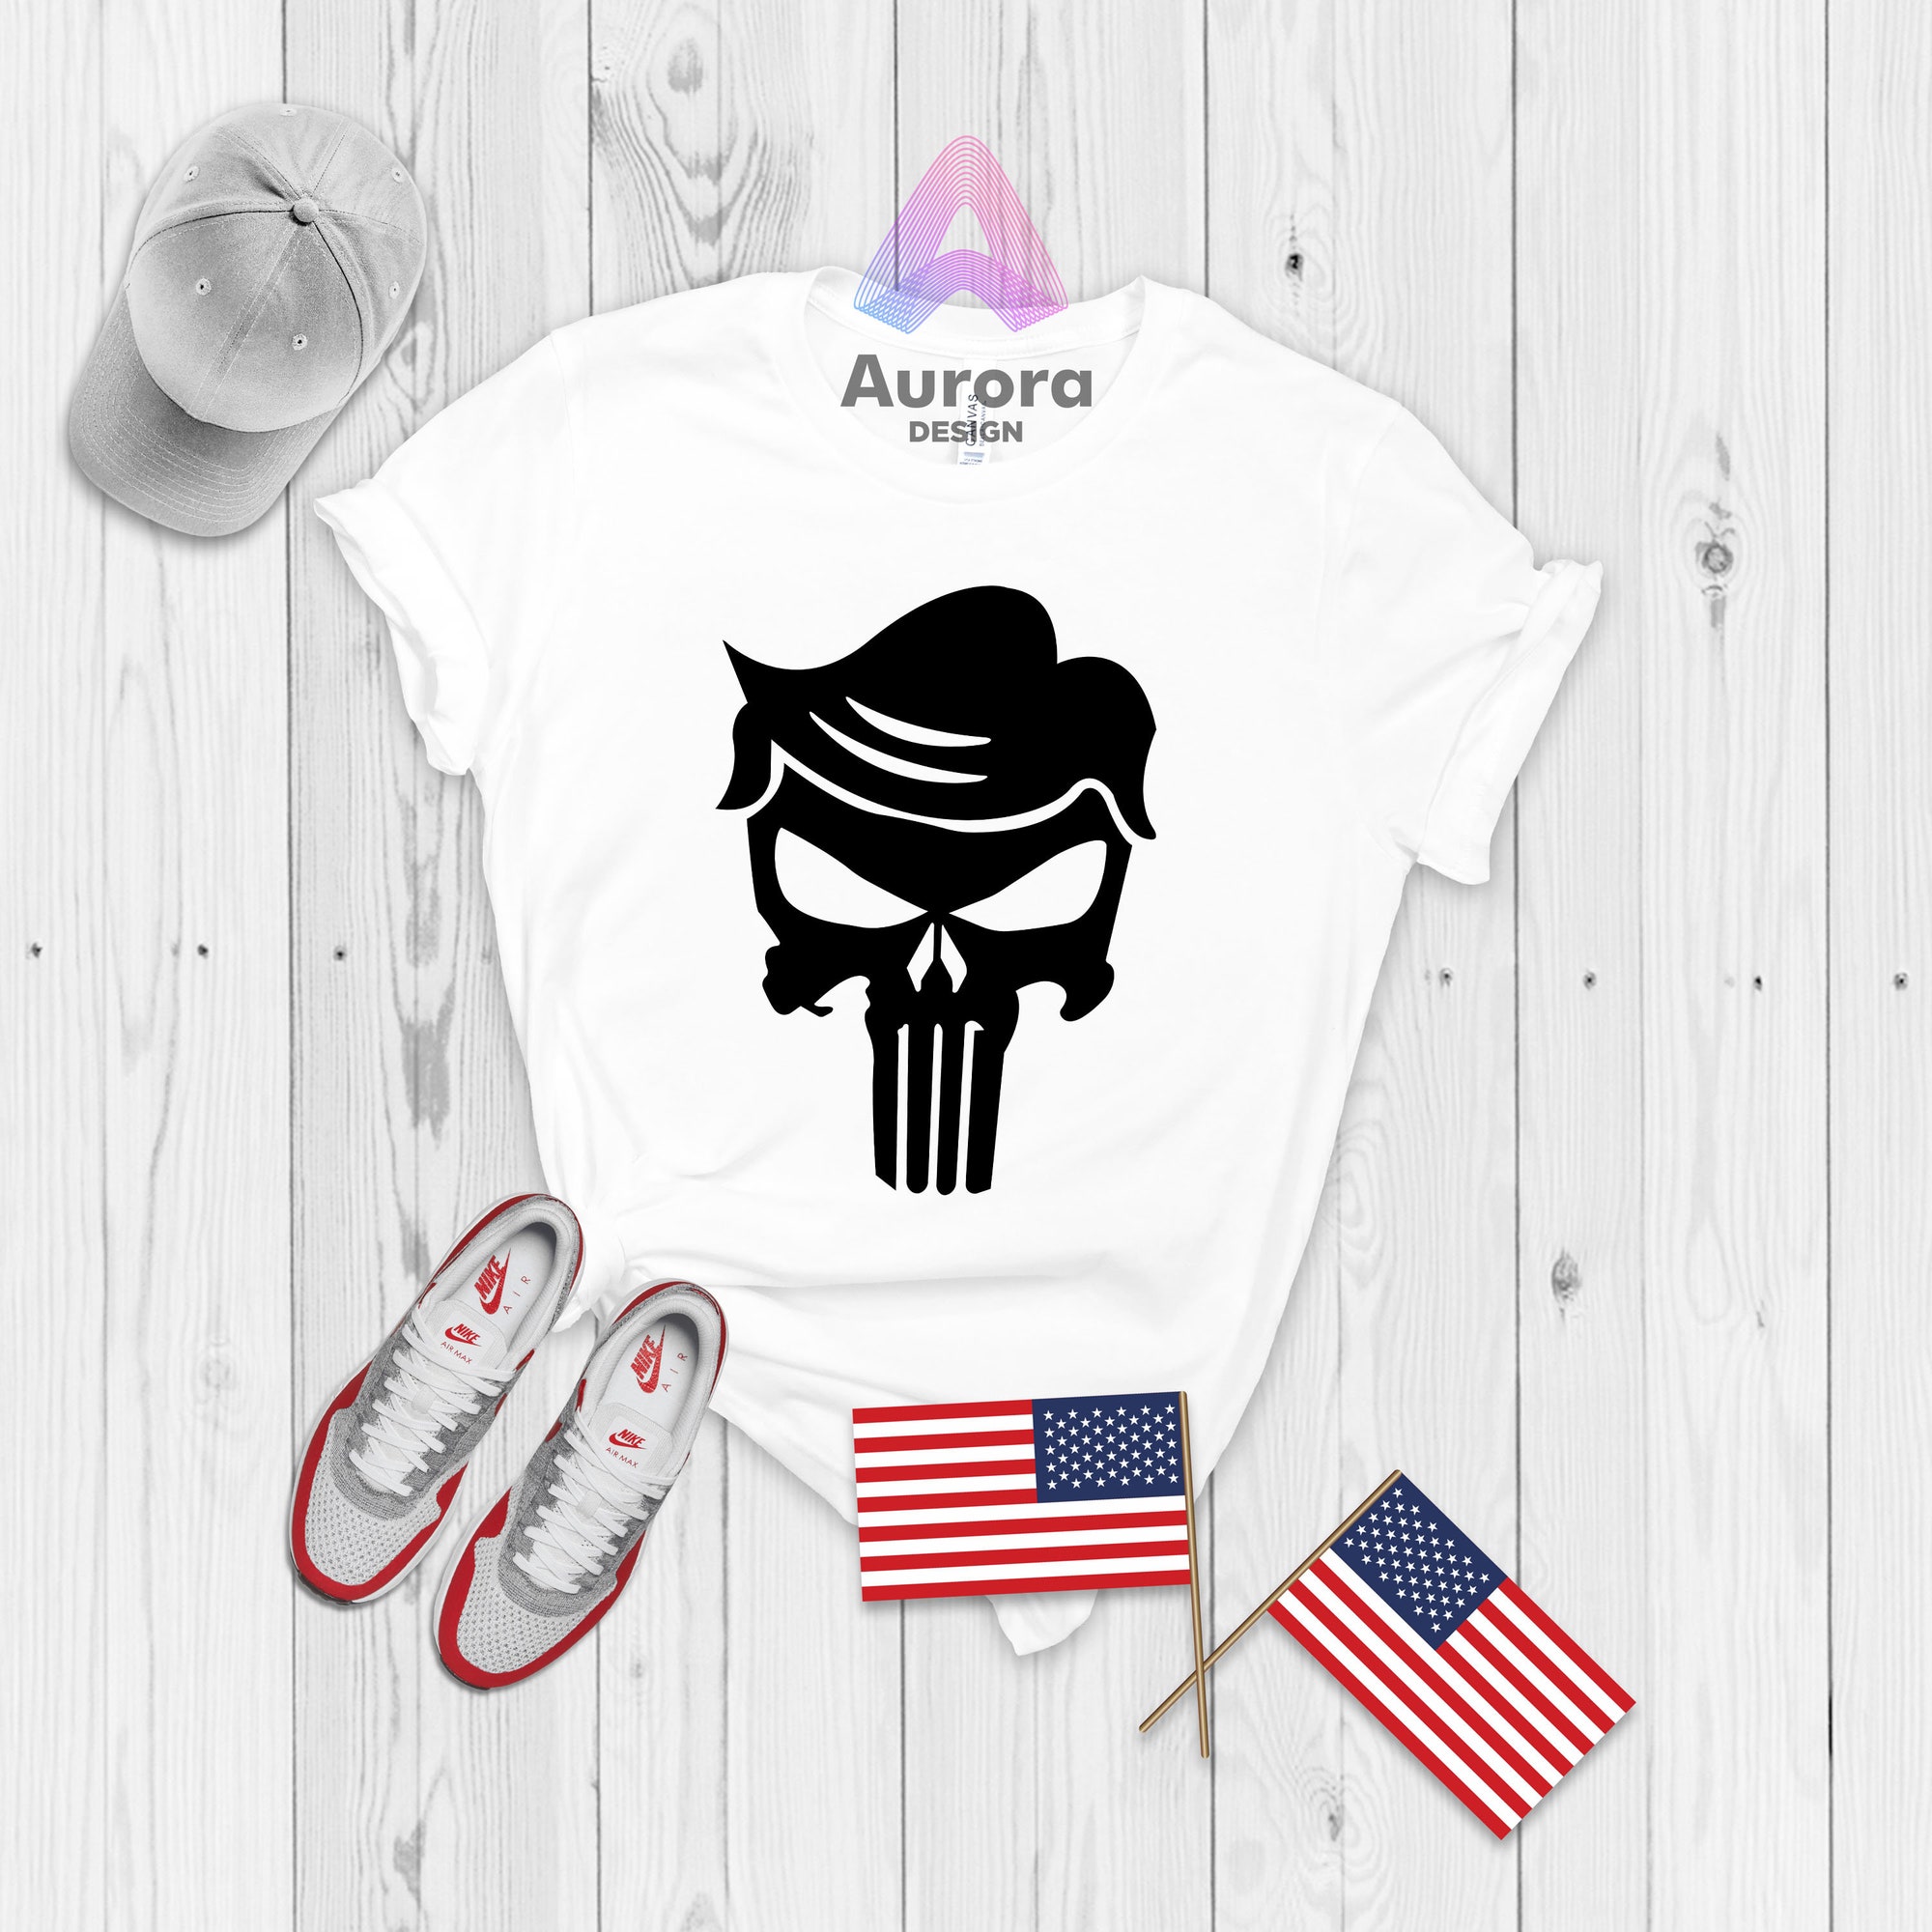 Discover Trump Punisher T-shirt, Funny Political Shirt, Funny Election Shirts, Republican T-shirt, Political Military Edition Tees, Patriotic T-shirt